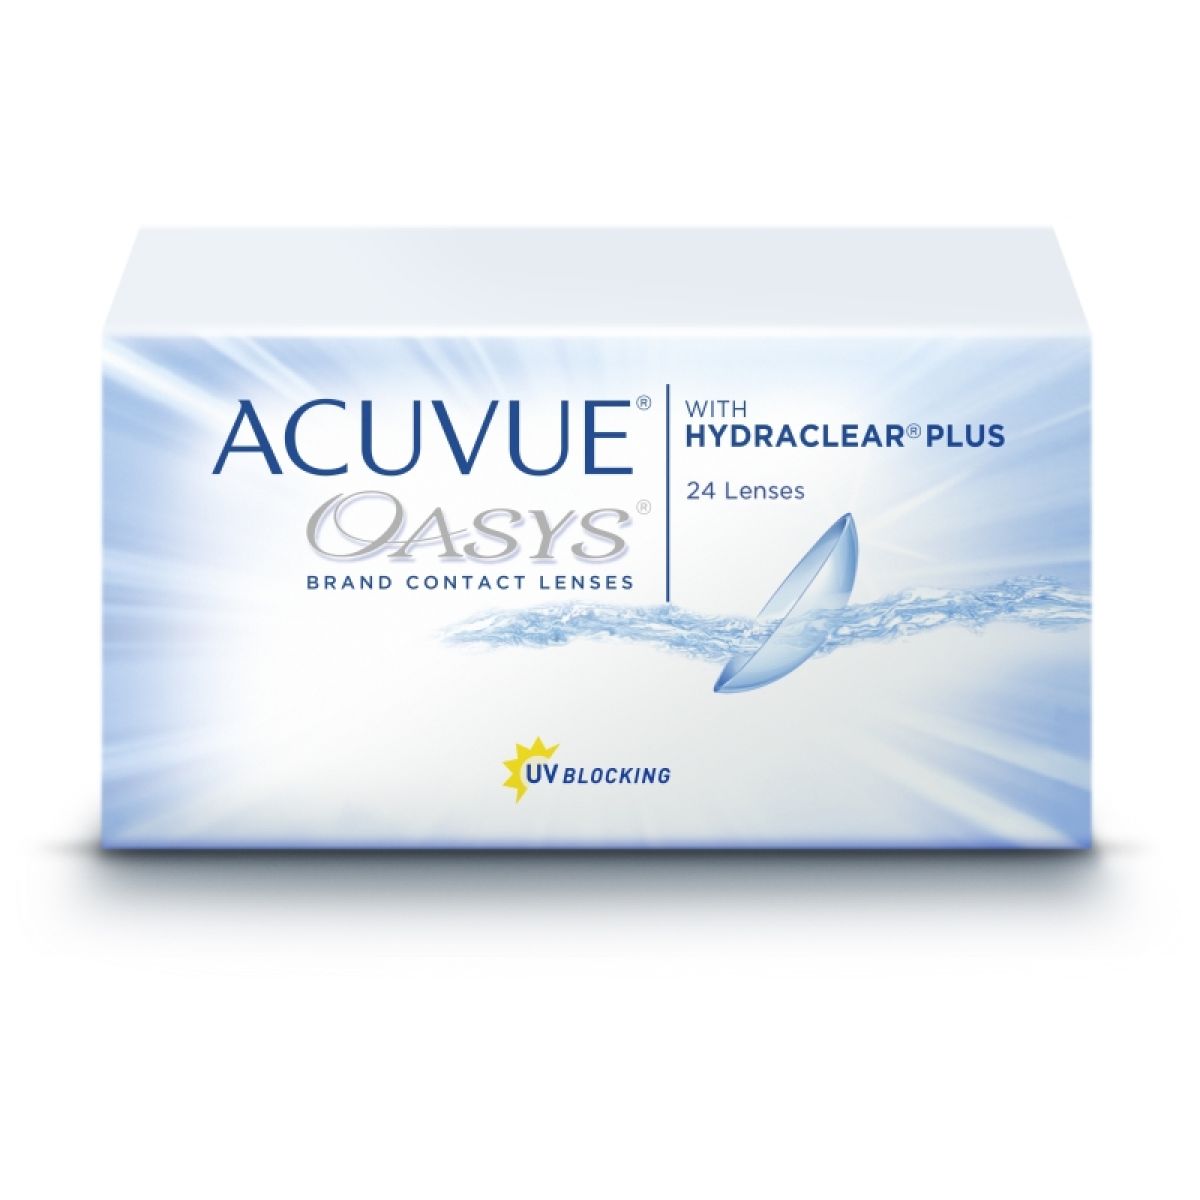 ACUVUE OASYS BI-WEEKLY DISPOSABLE CONTACT LENSES (24 LENSES)